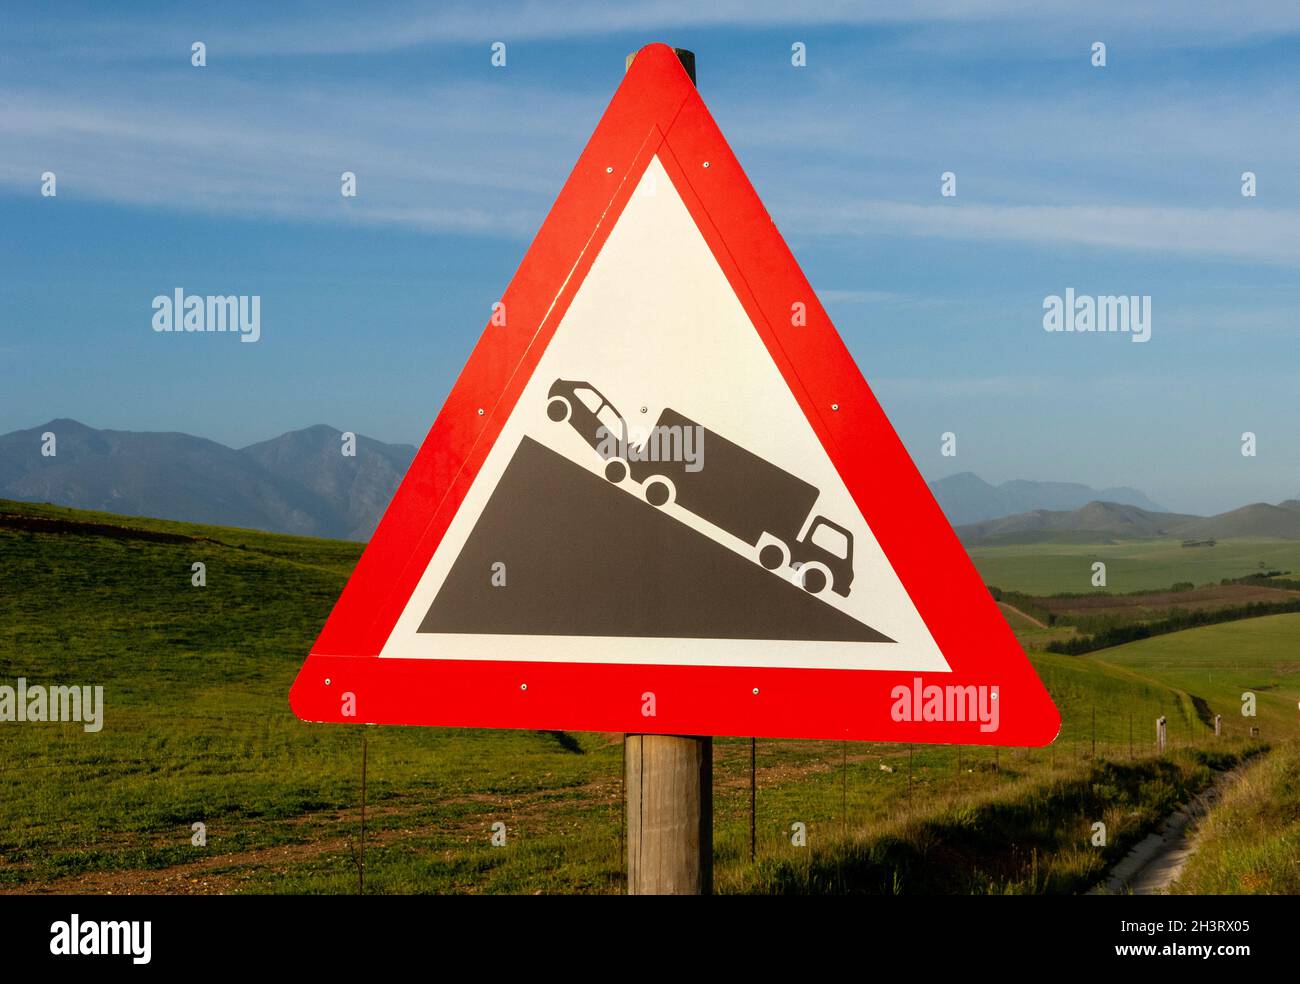 South Africa road signs - Warning sign - warning slow moving heavy vehicles ahead. Stock Photo